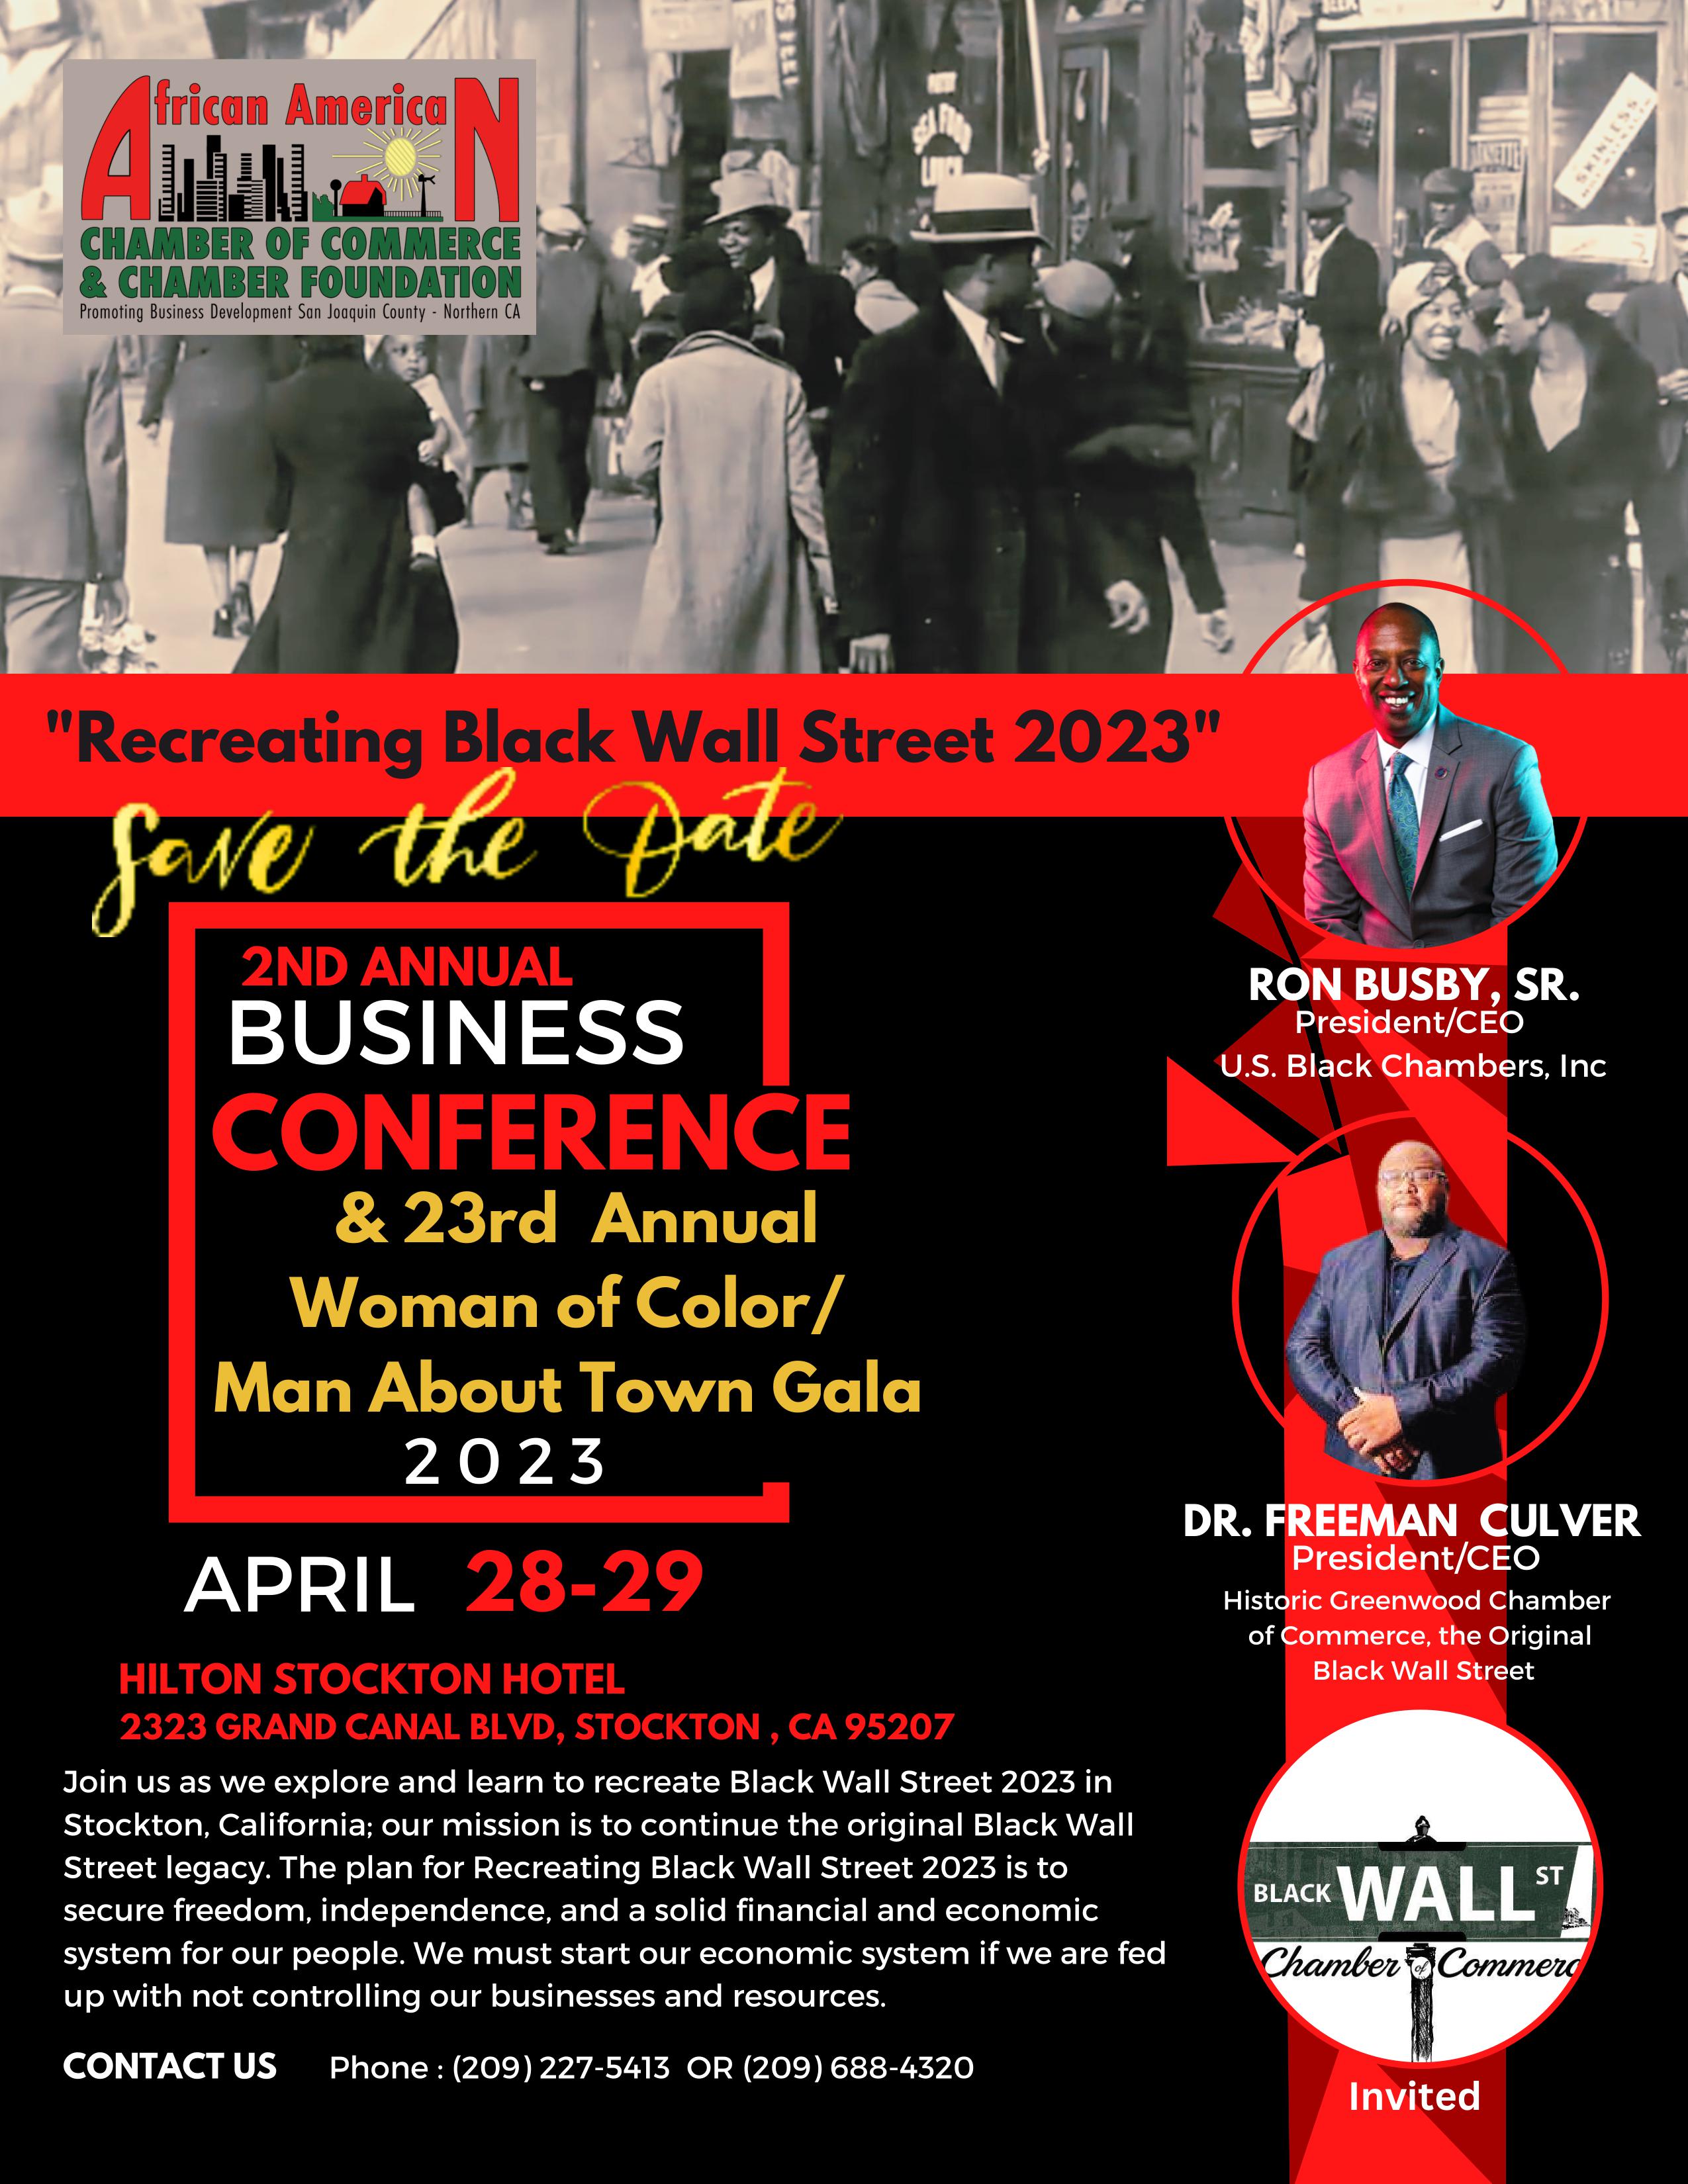 FINALSJAACOC 2nd Annual Business Conference Flyer 2023